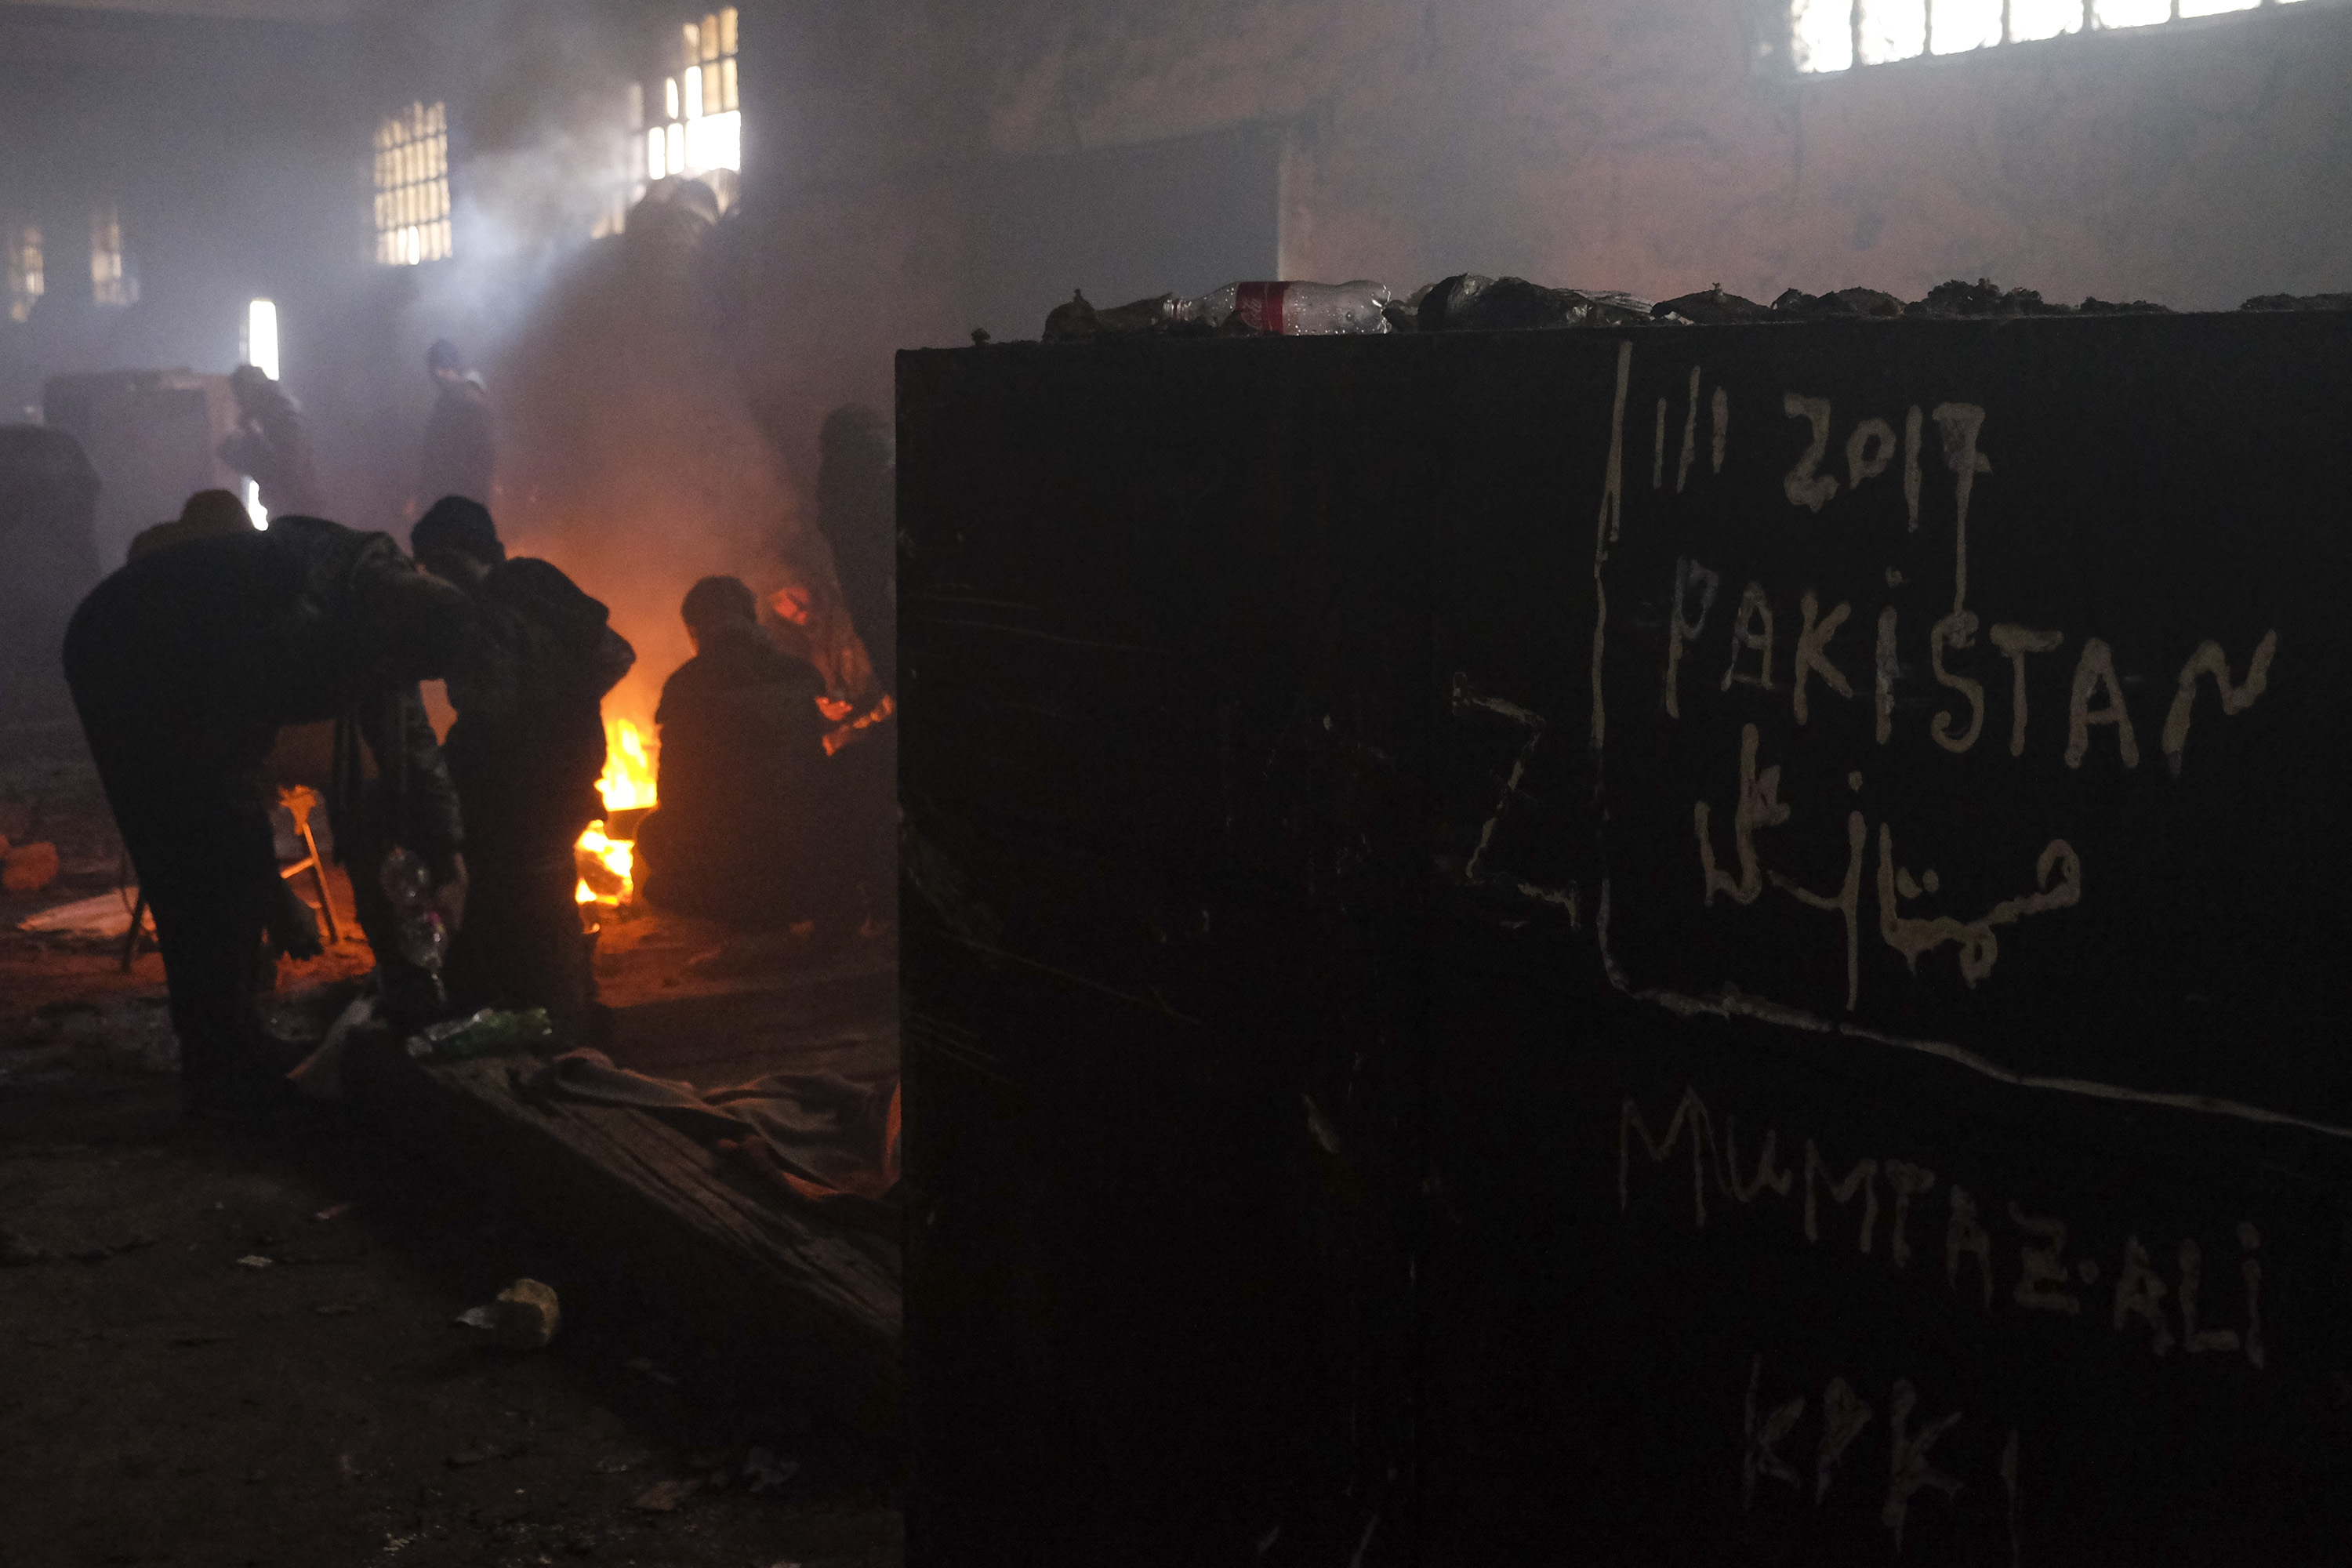 More than 1500 people are living in bleak conditions in one of the warehouses near the train station, Jan. 17, 2017 in Belgrade, Serbia. (Awakening—Barcroft Media/Getty Images)